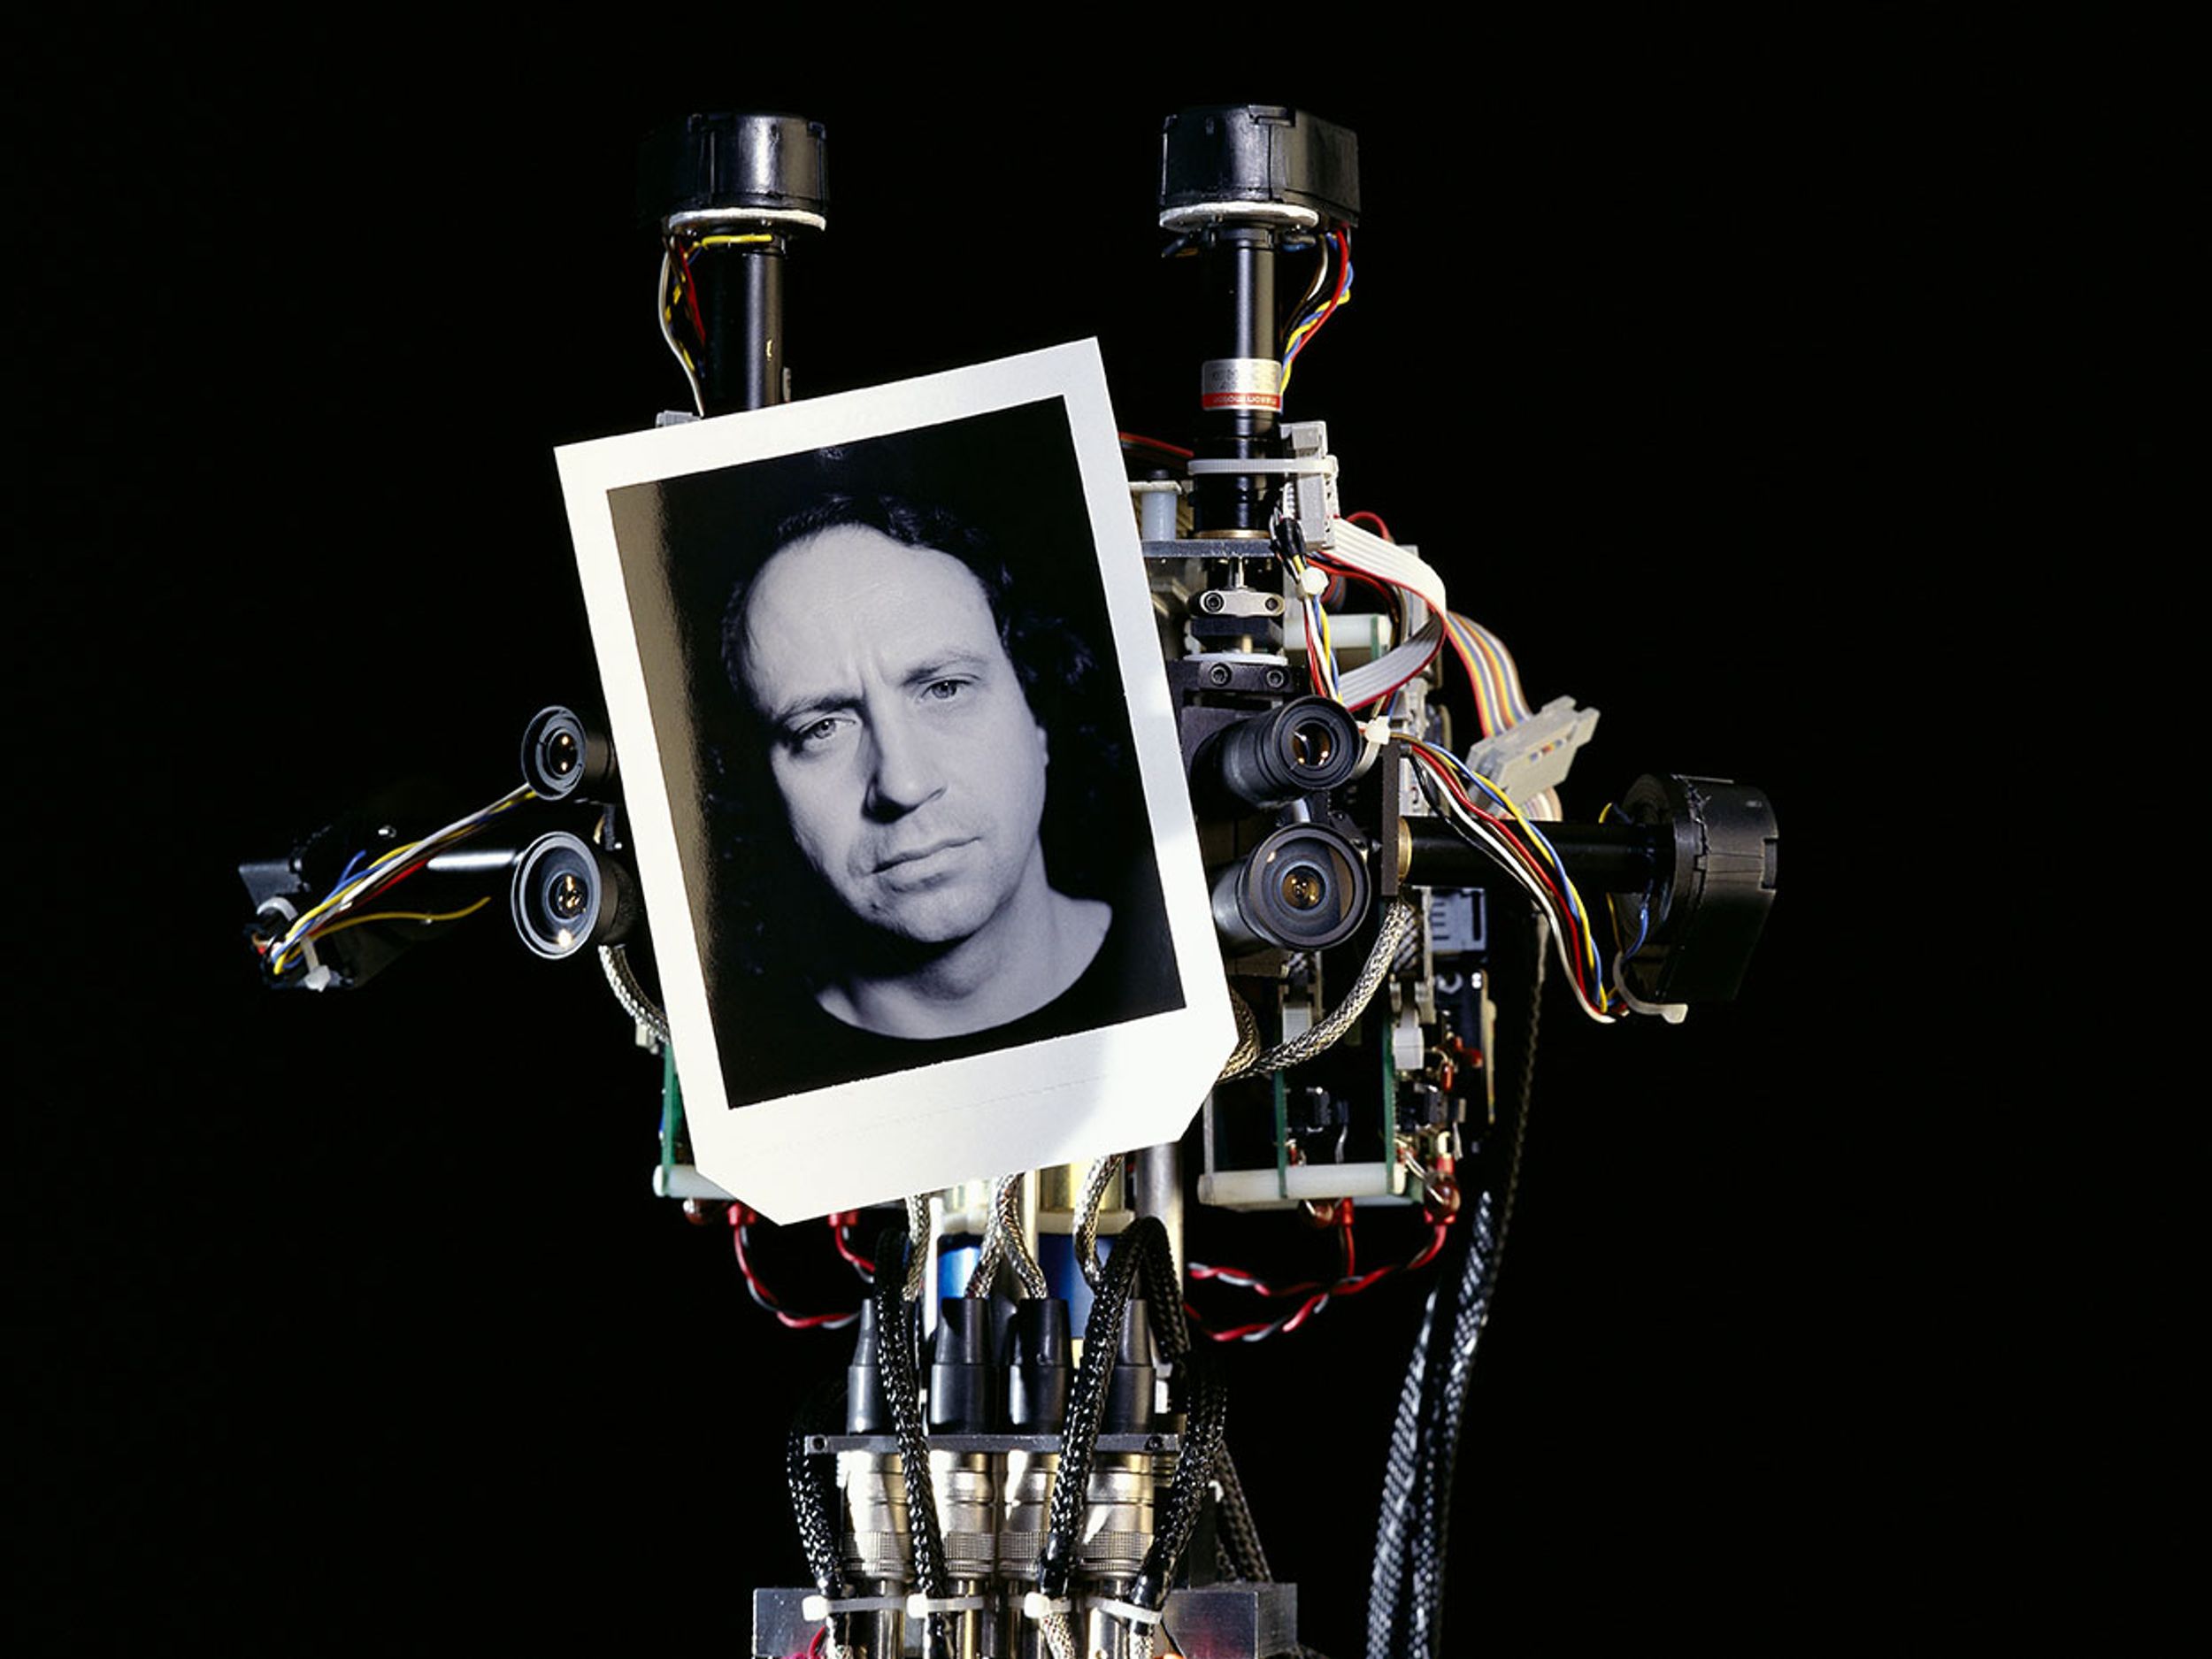 MIT humanoid robot Cog holding up a black and white portrait of Rodney Brooks